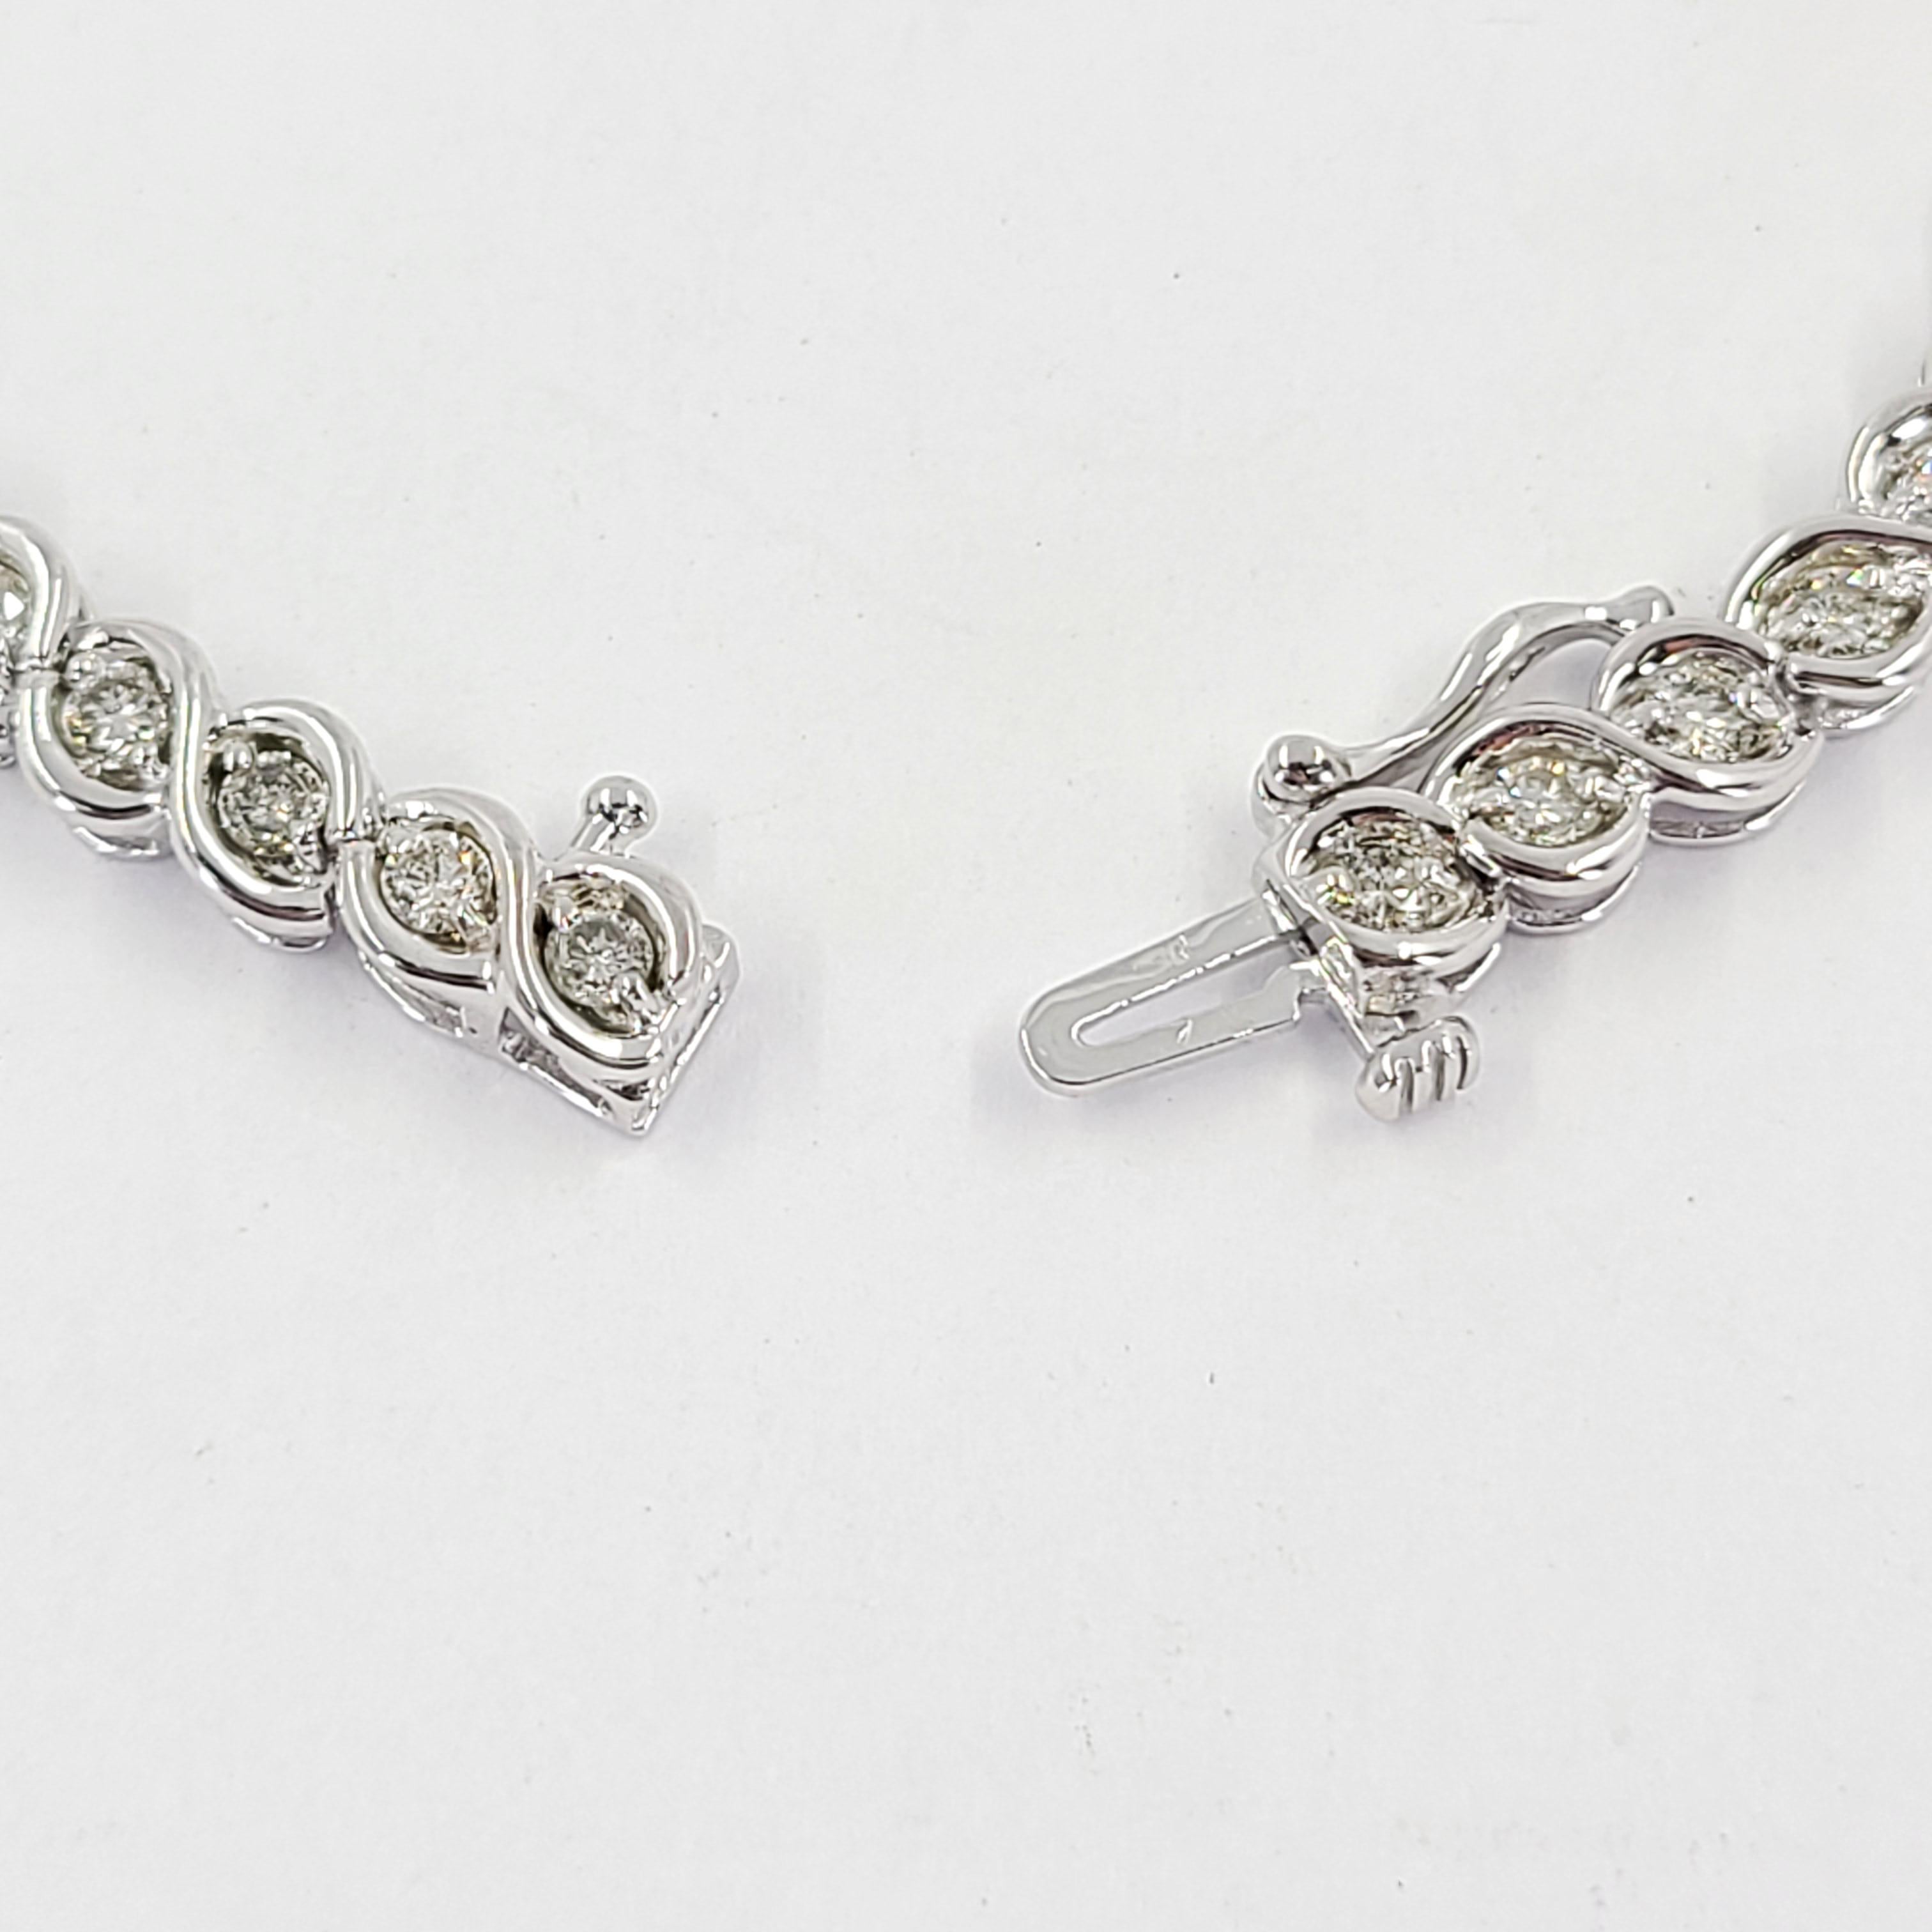 White Gold Diamond Tennis Bracelet In Good Condition For Sale In Coral Gables, FL